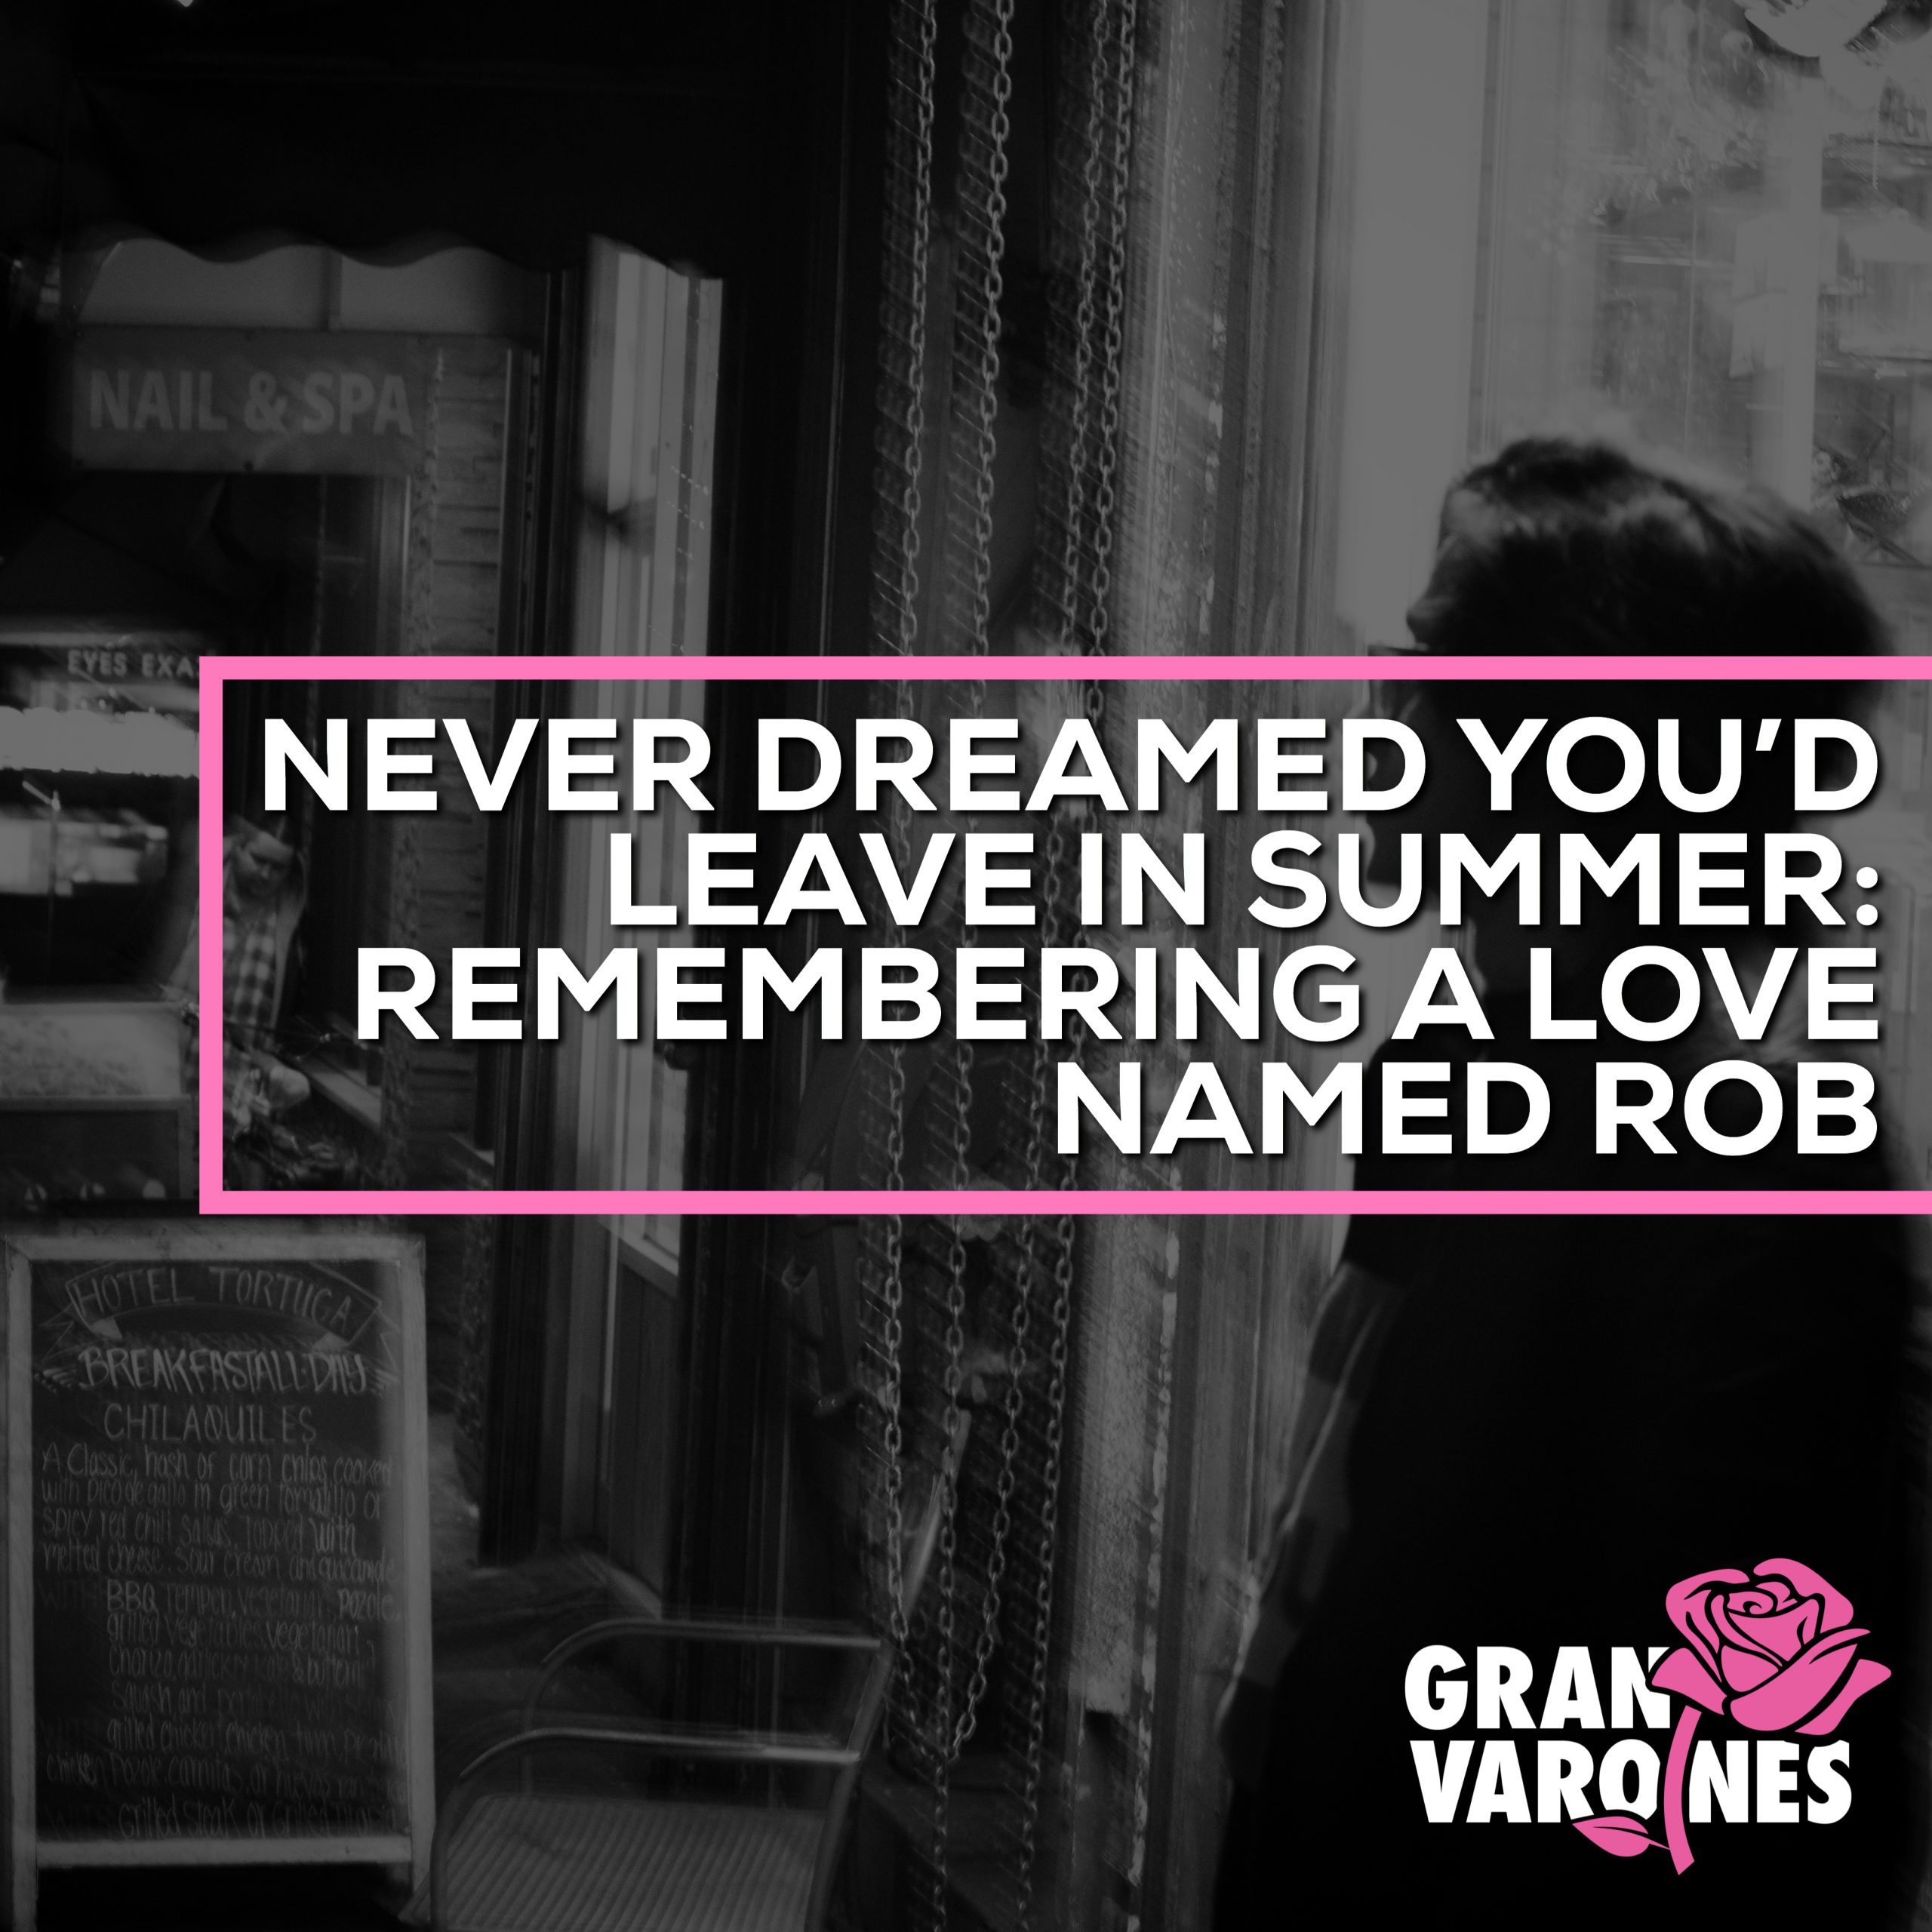 Never Dreamed You Leave In Summer: Remembering a Love Named Rob